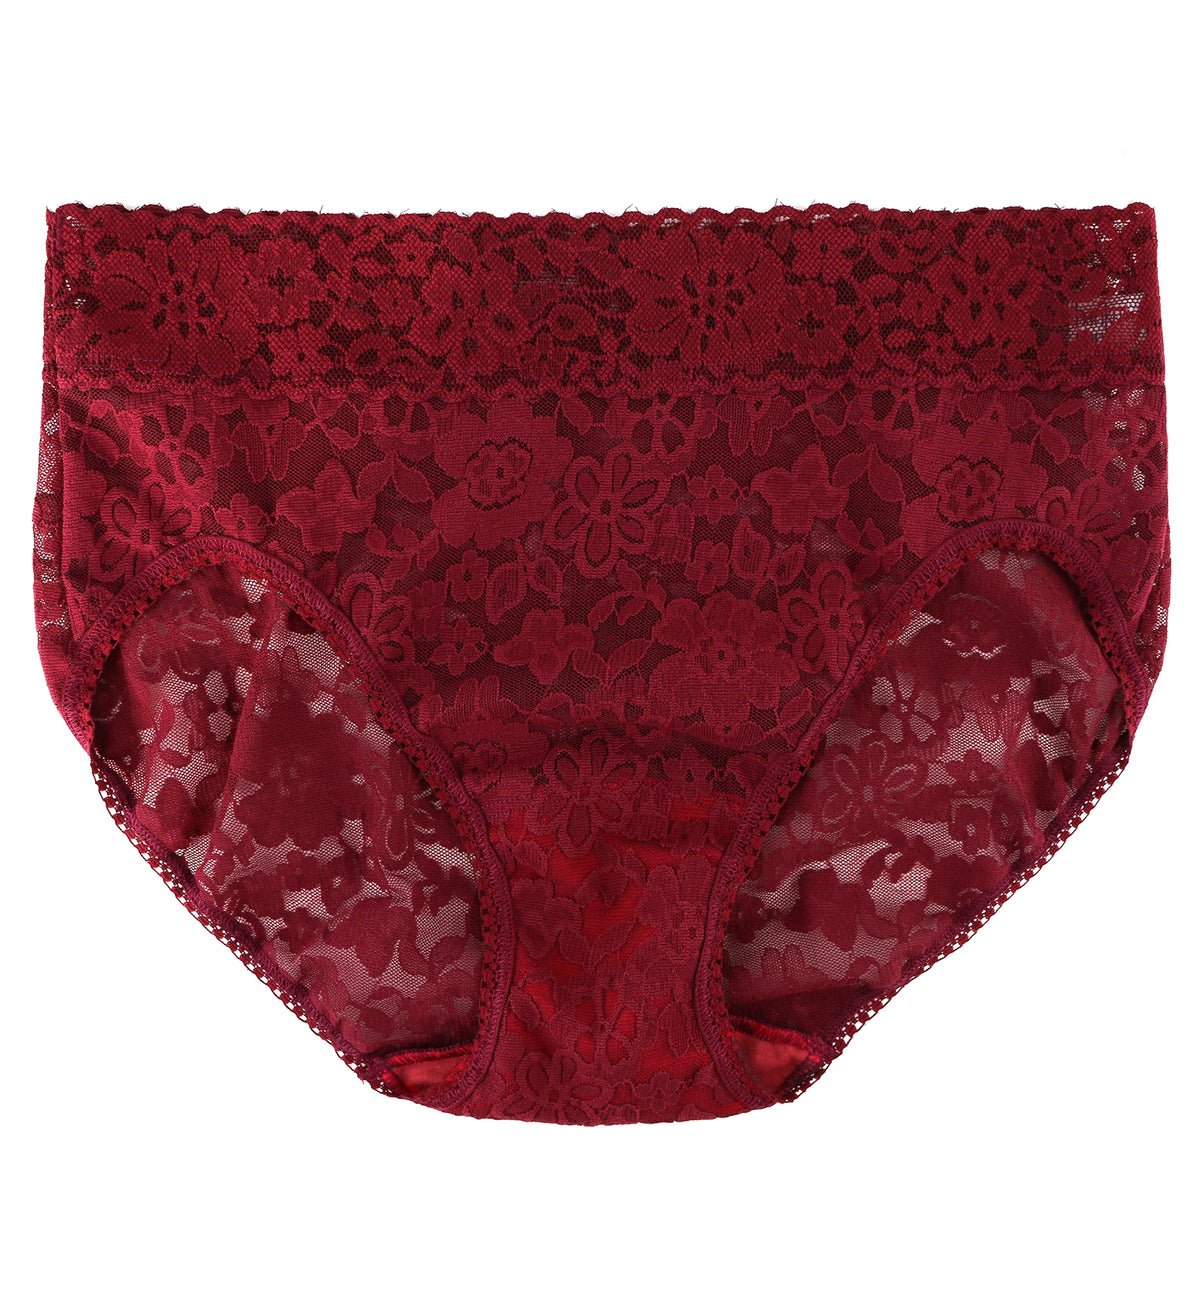 Hanky Panky Daily Lace French Brief (772461P),Small,Lipstick Red - Lipstick Red,Small